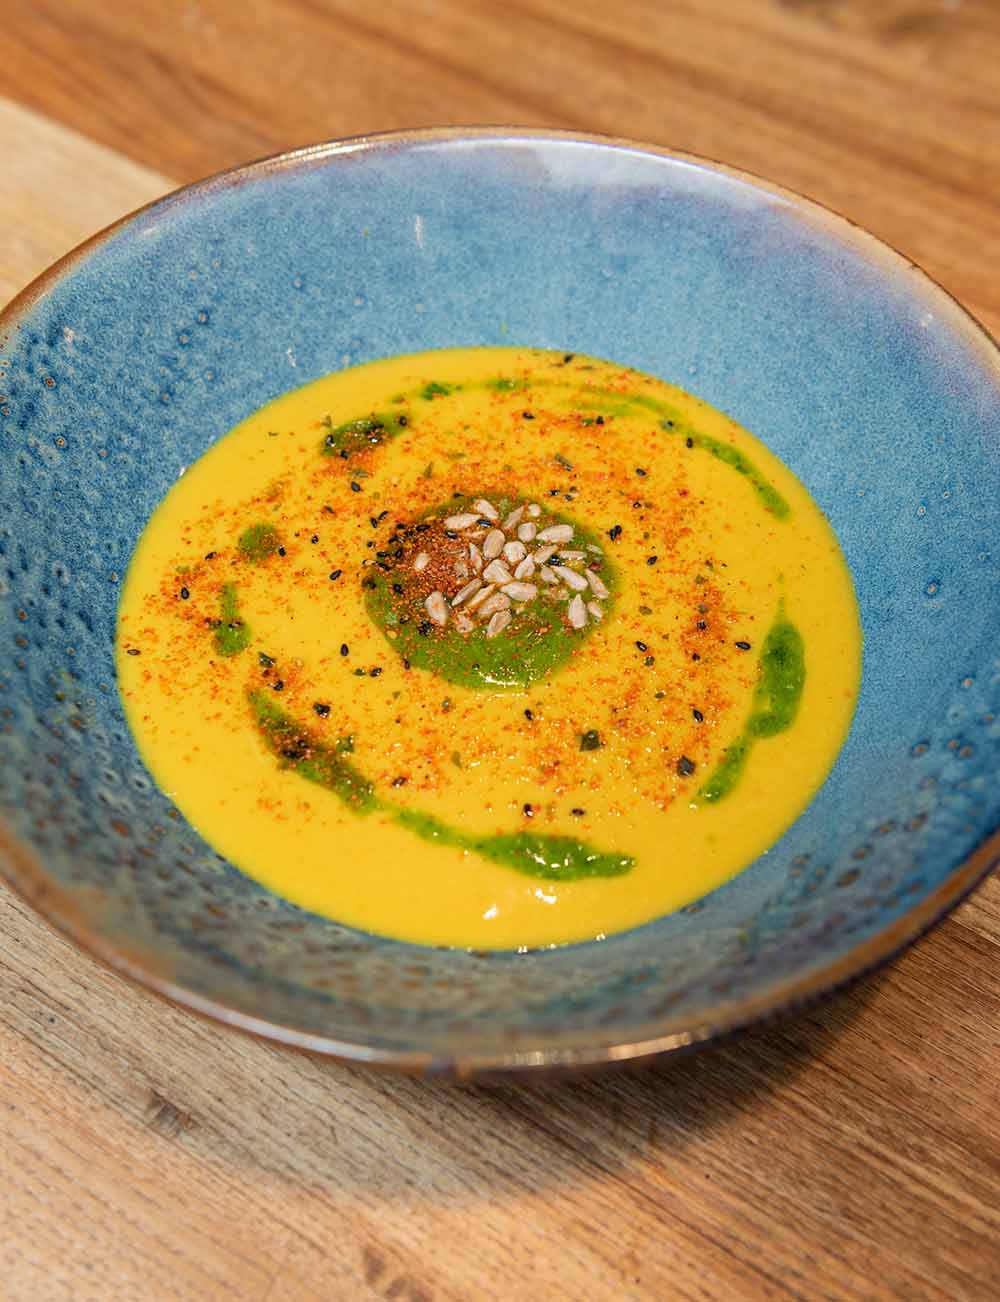 Chef Mike’s Butternut Squash Soup